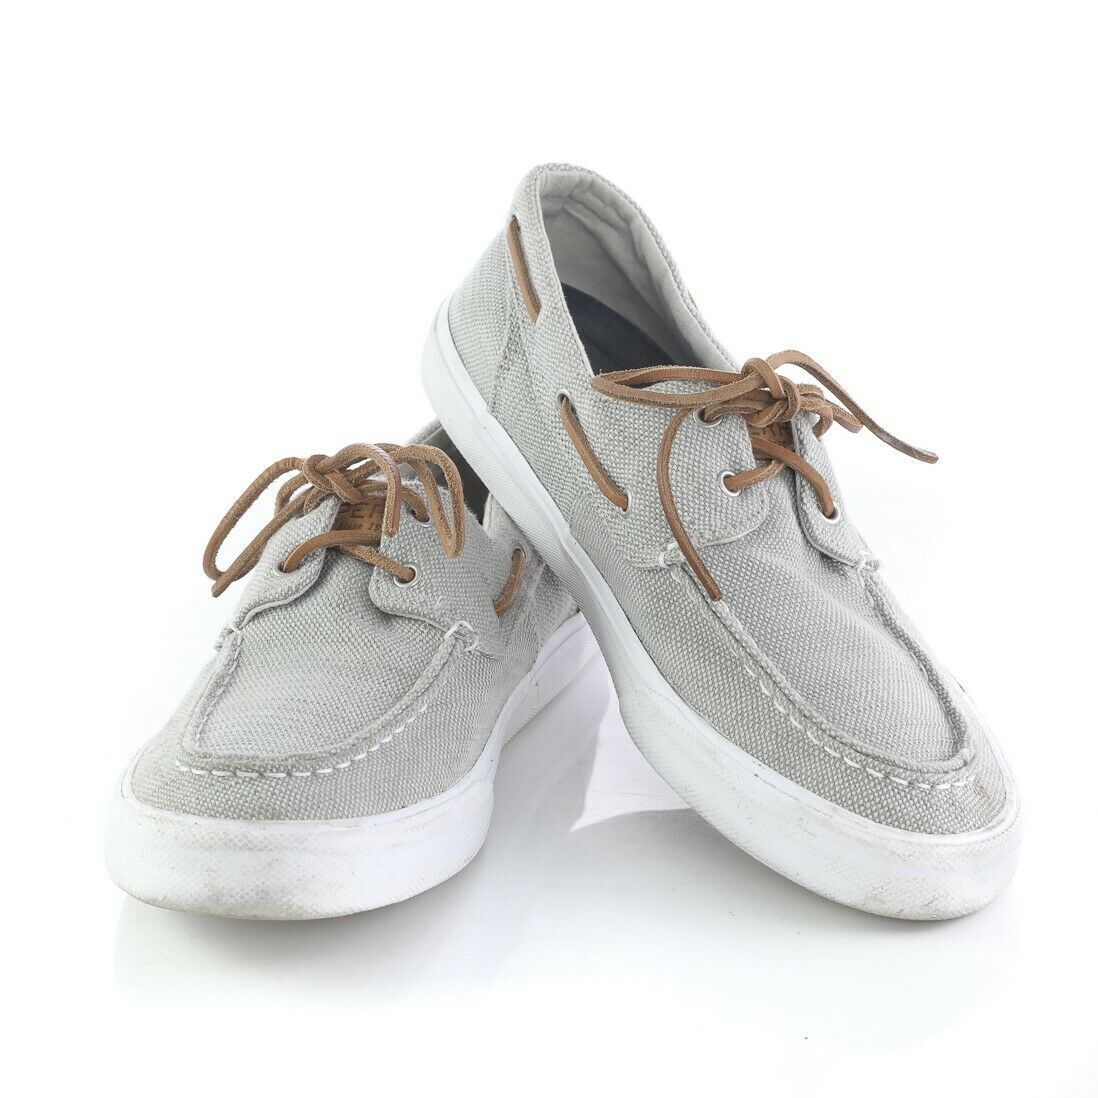 Primary image for Sperry Top-Sider Gray Canvas Boat Shoes 2-Eye Loafers Casual Shoes Mens 9